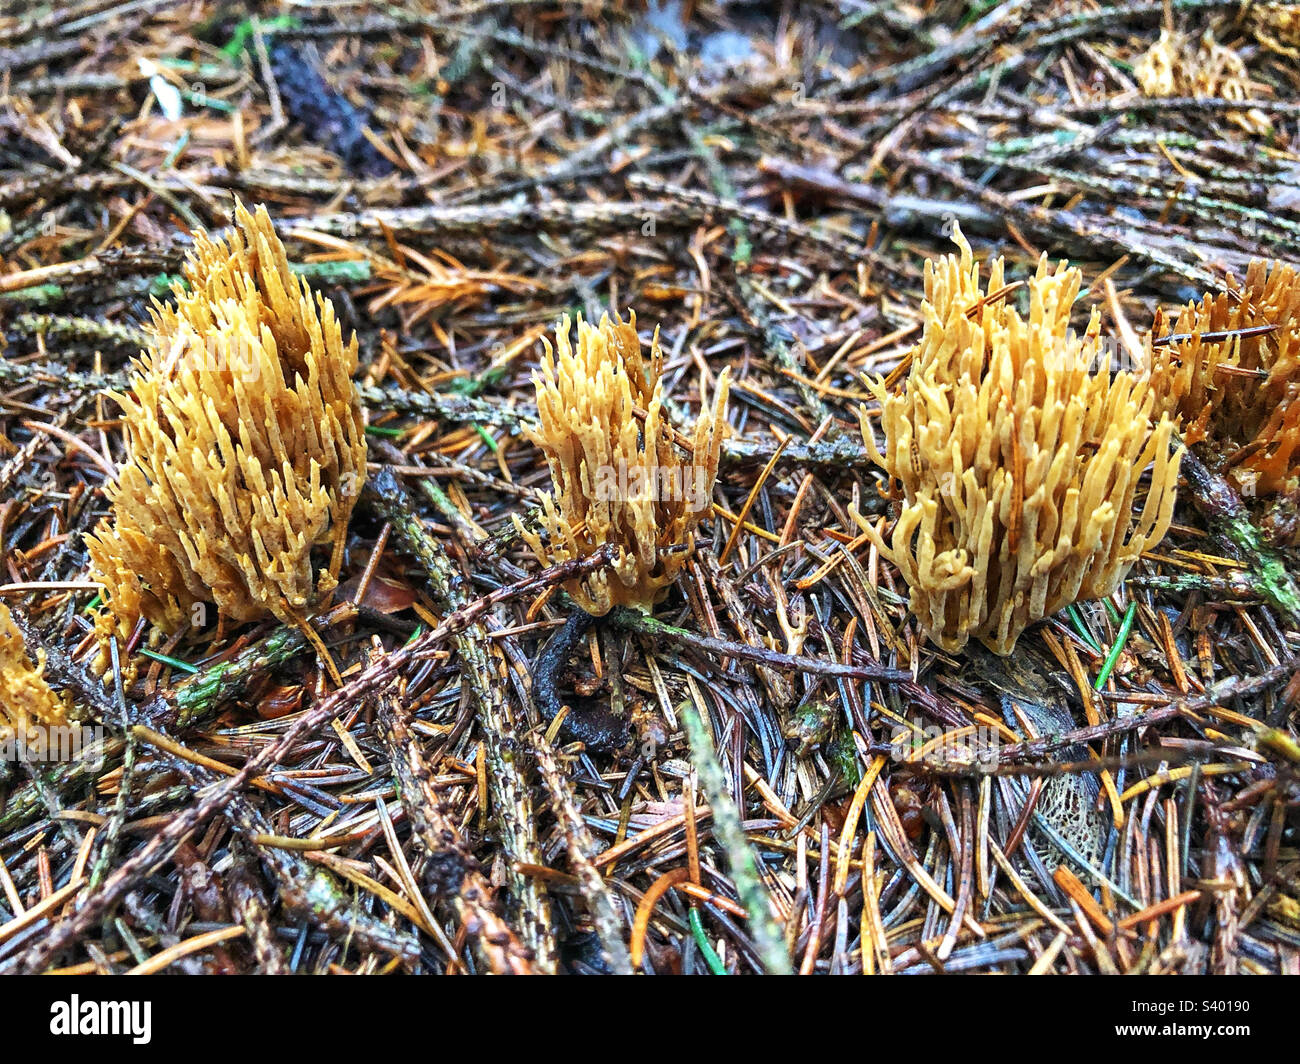 Strict-branch coral fungus (Samaria stricta) Growing in a pine forest near Winchester Hampshire United Kingdom Stock Photo